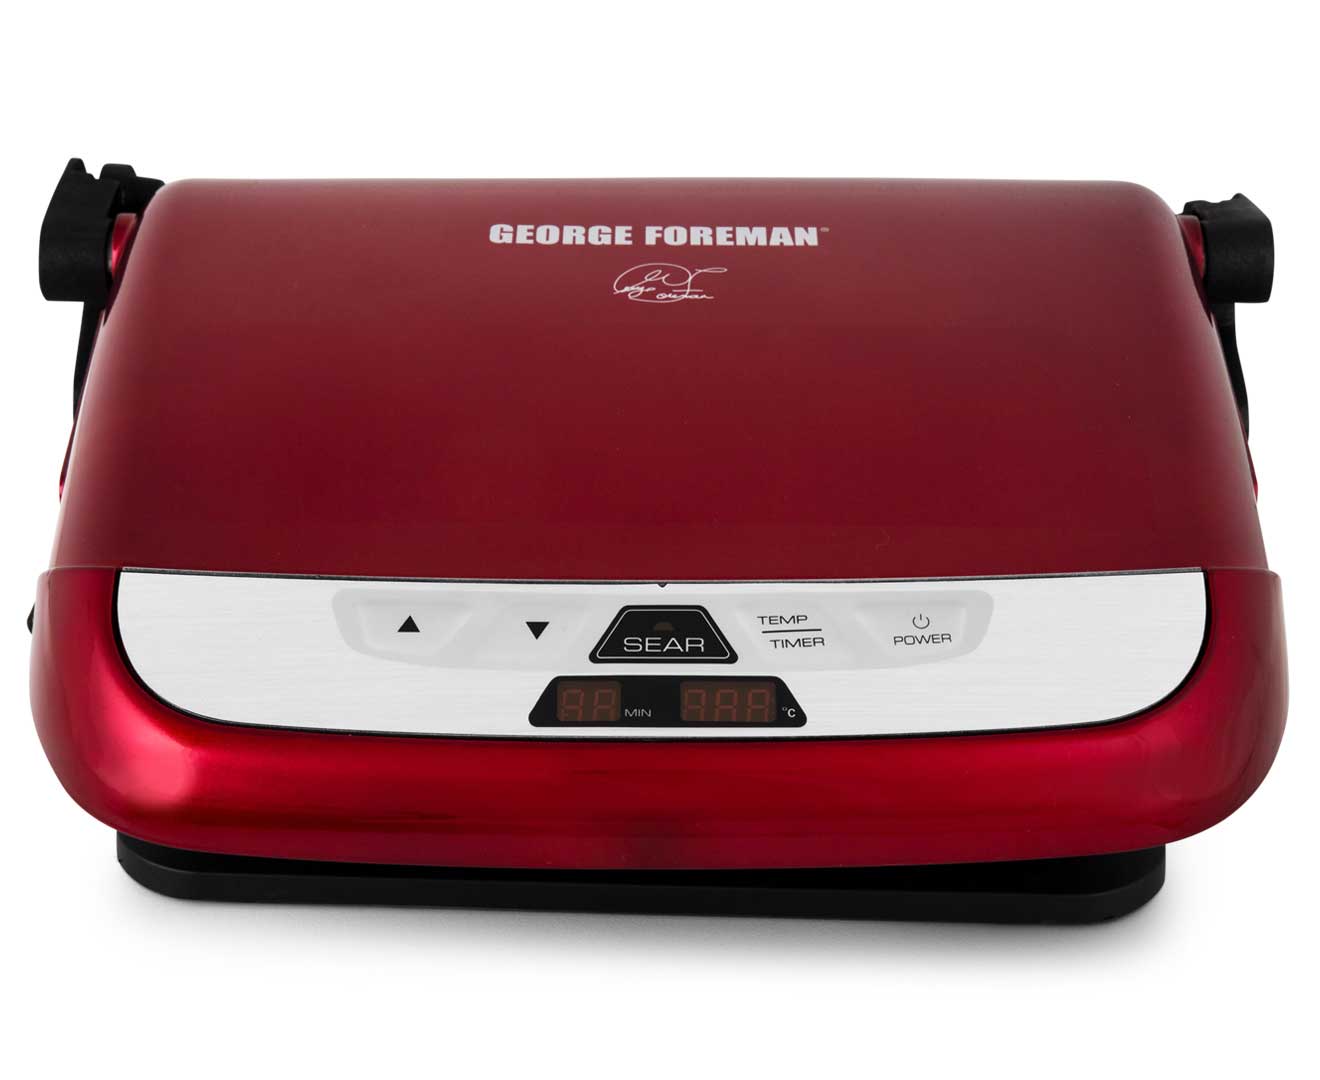 George Foreman Champ All In One Grill - Candy Apple Red